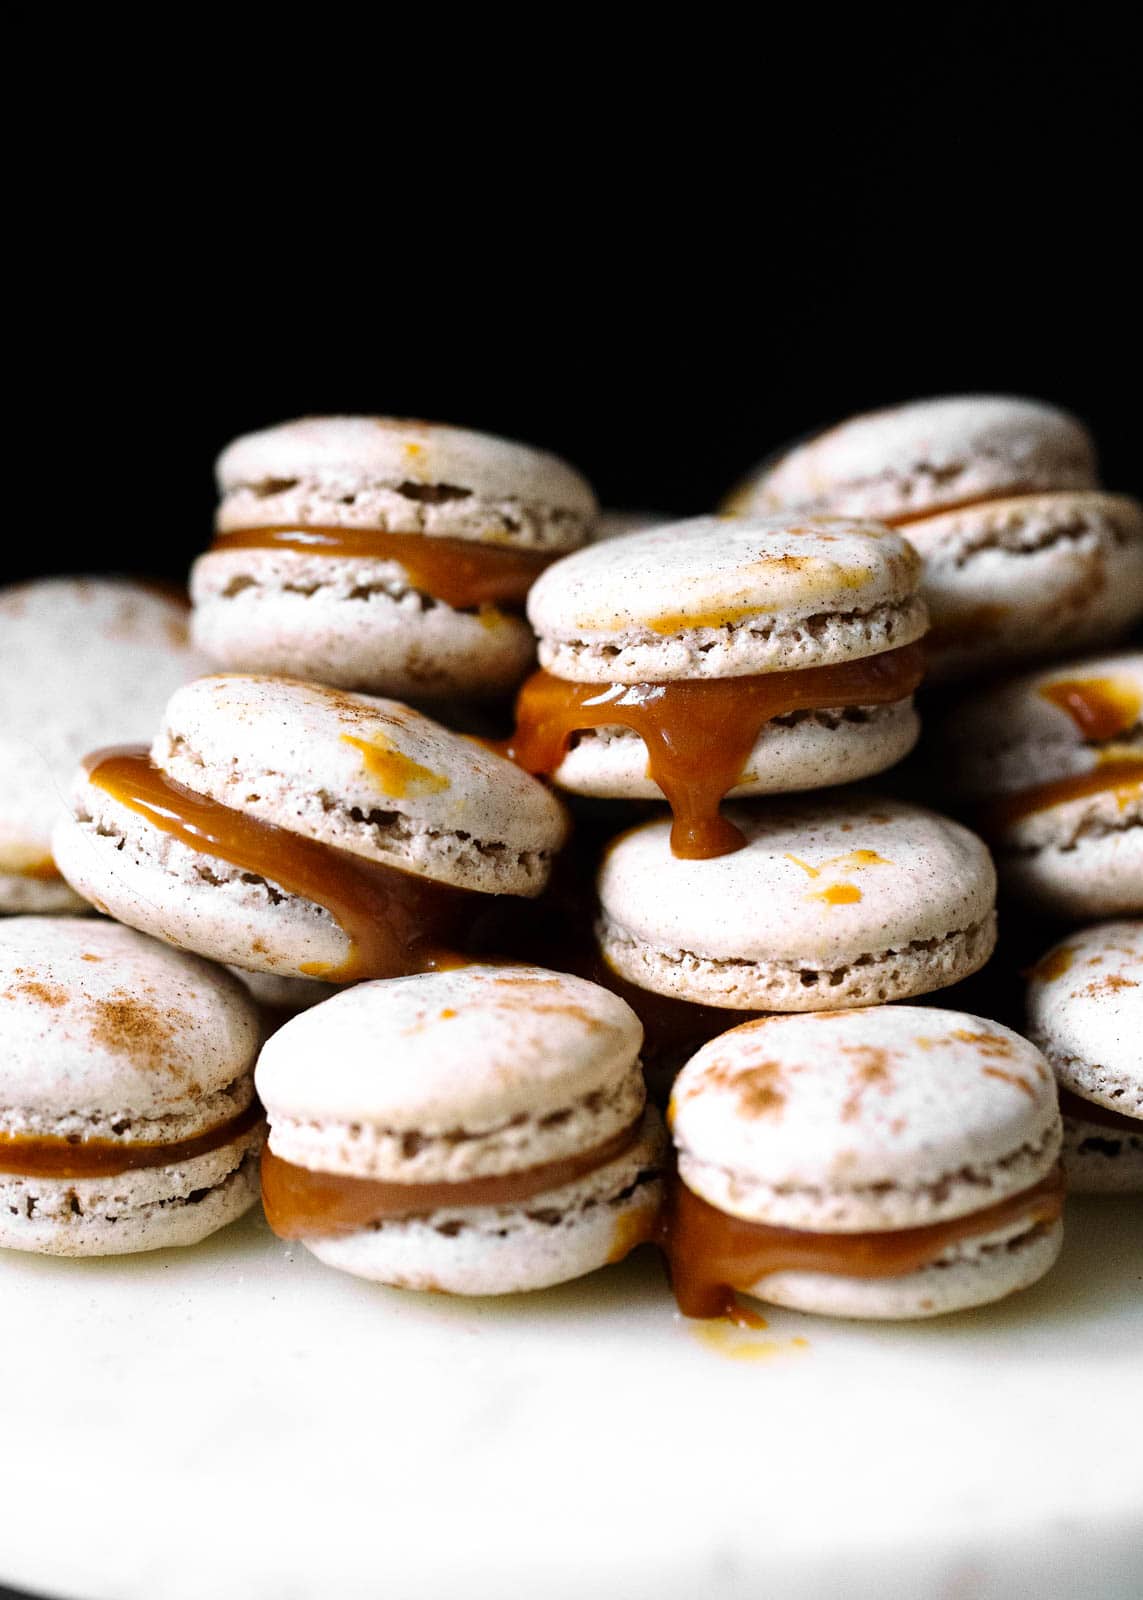 Chai spiced macarons with a salted caramel filling. Perfectly spiced and dangerously delicious!